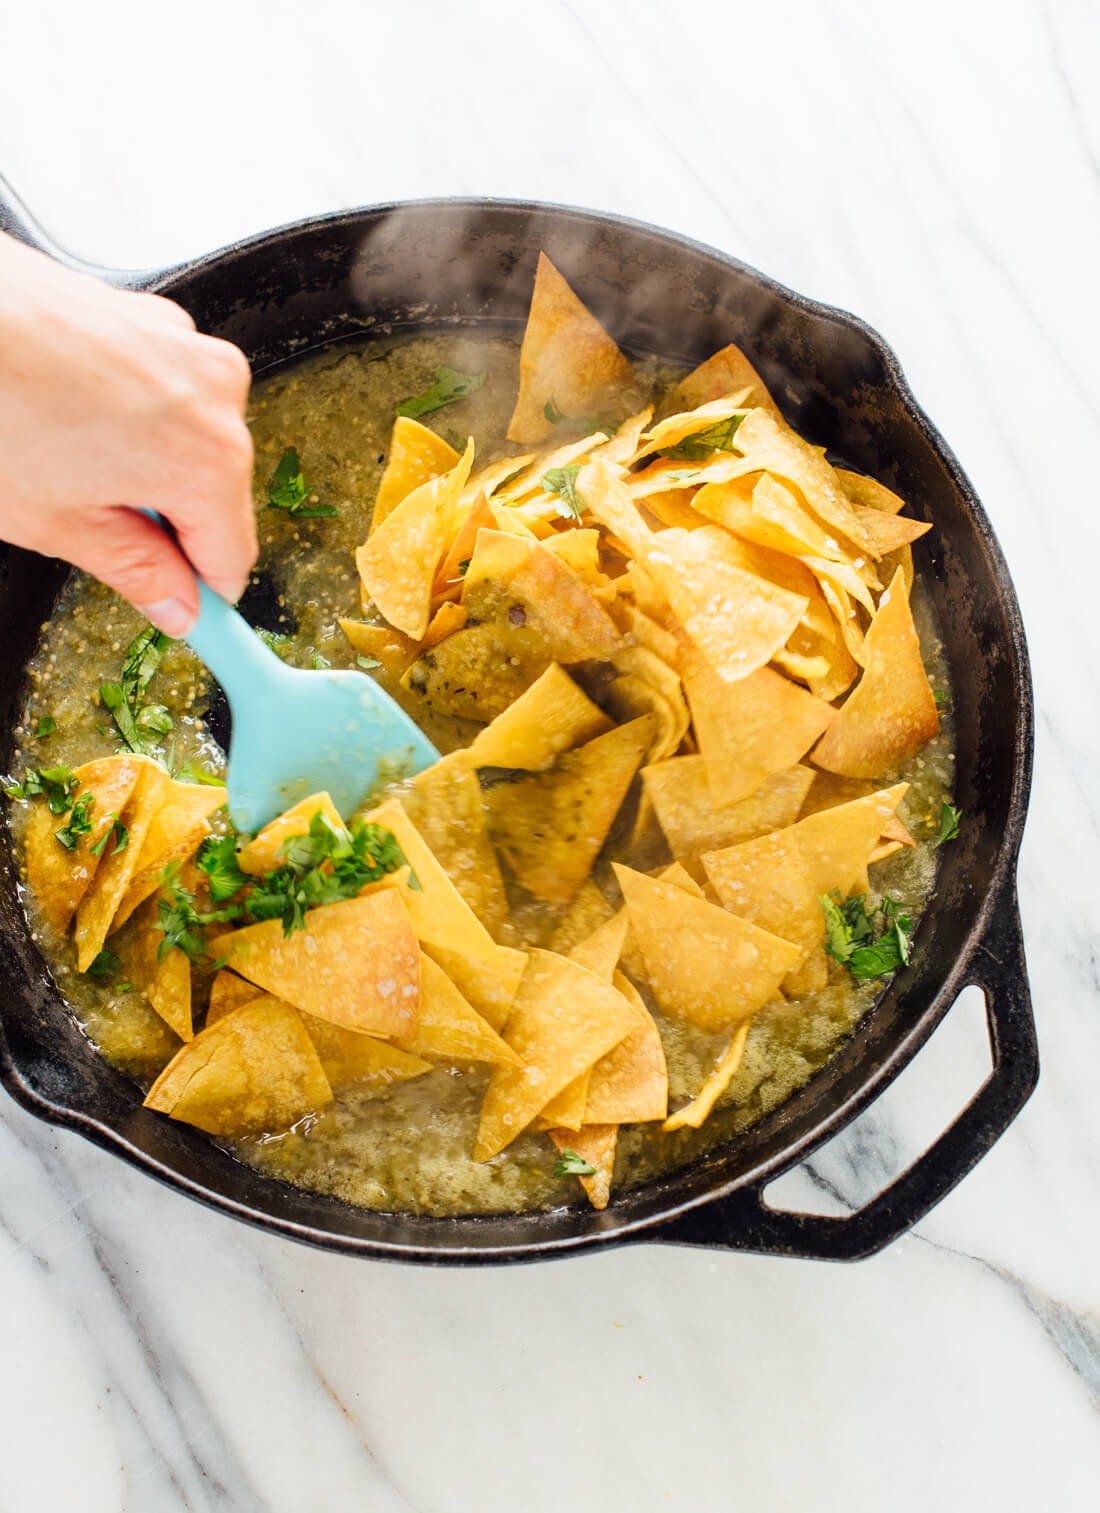 How to make chilaquiles verdes (tortilla chips tossed in warmed salsa verde, often served with fried eggs on top) - cookieandkate.com